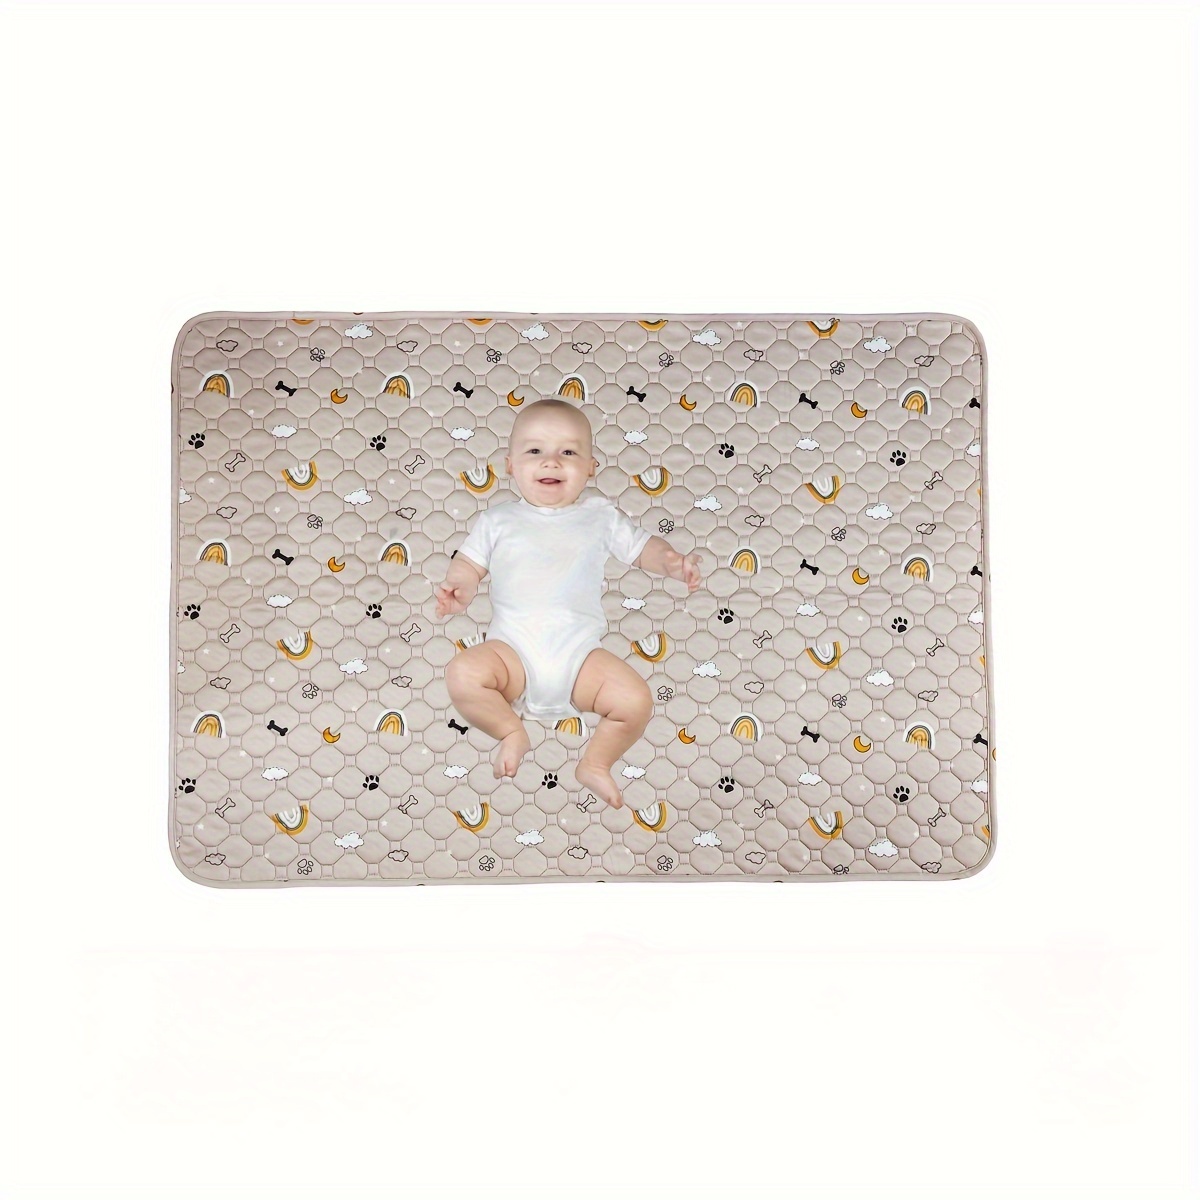 Baby Crawling Mat Kids Play Floor Mat For Toddlers